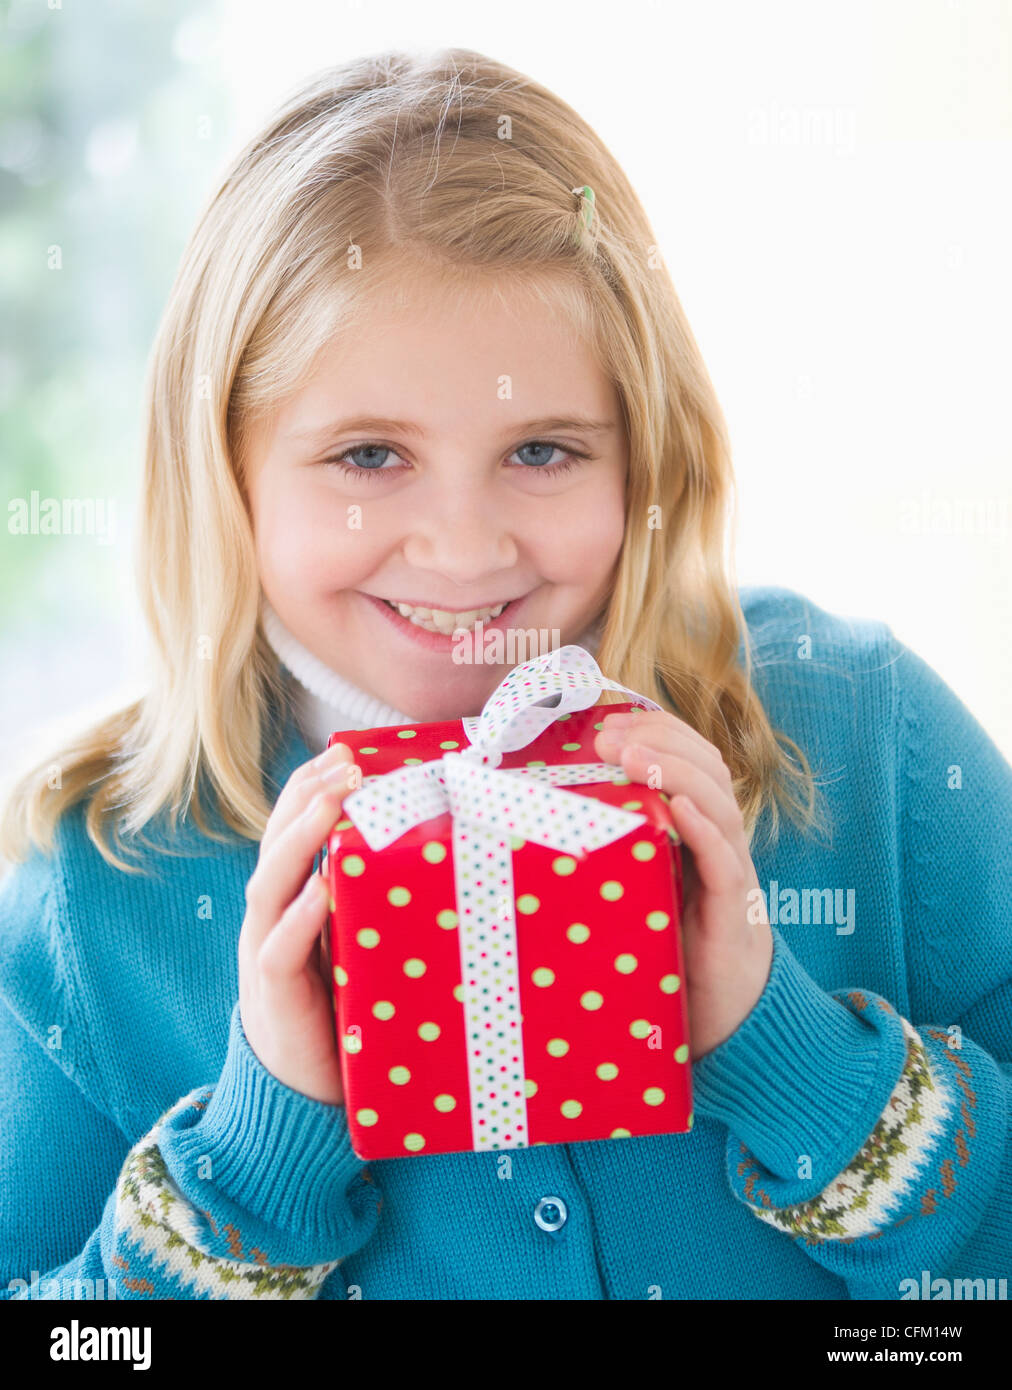 USA, New Jersey, Jersey City, Portrait of smiling girl (8-9) holding gift Banque D'Images